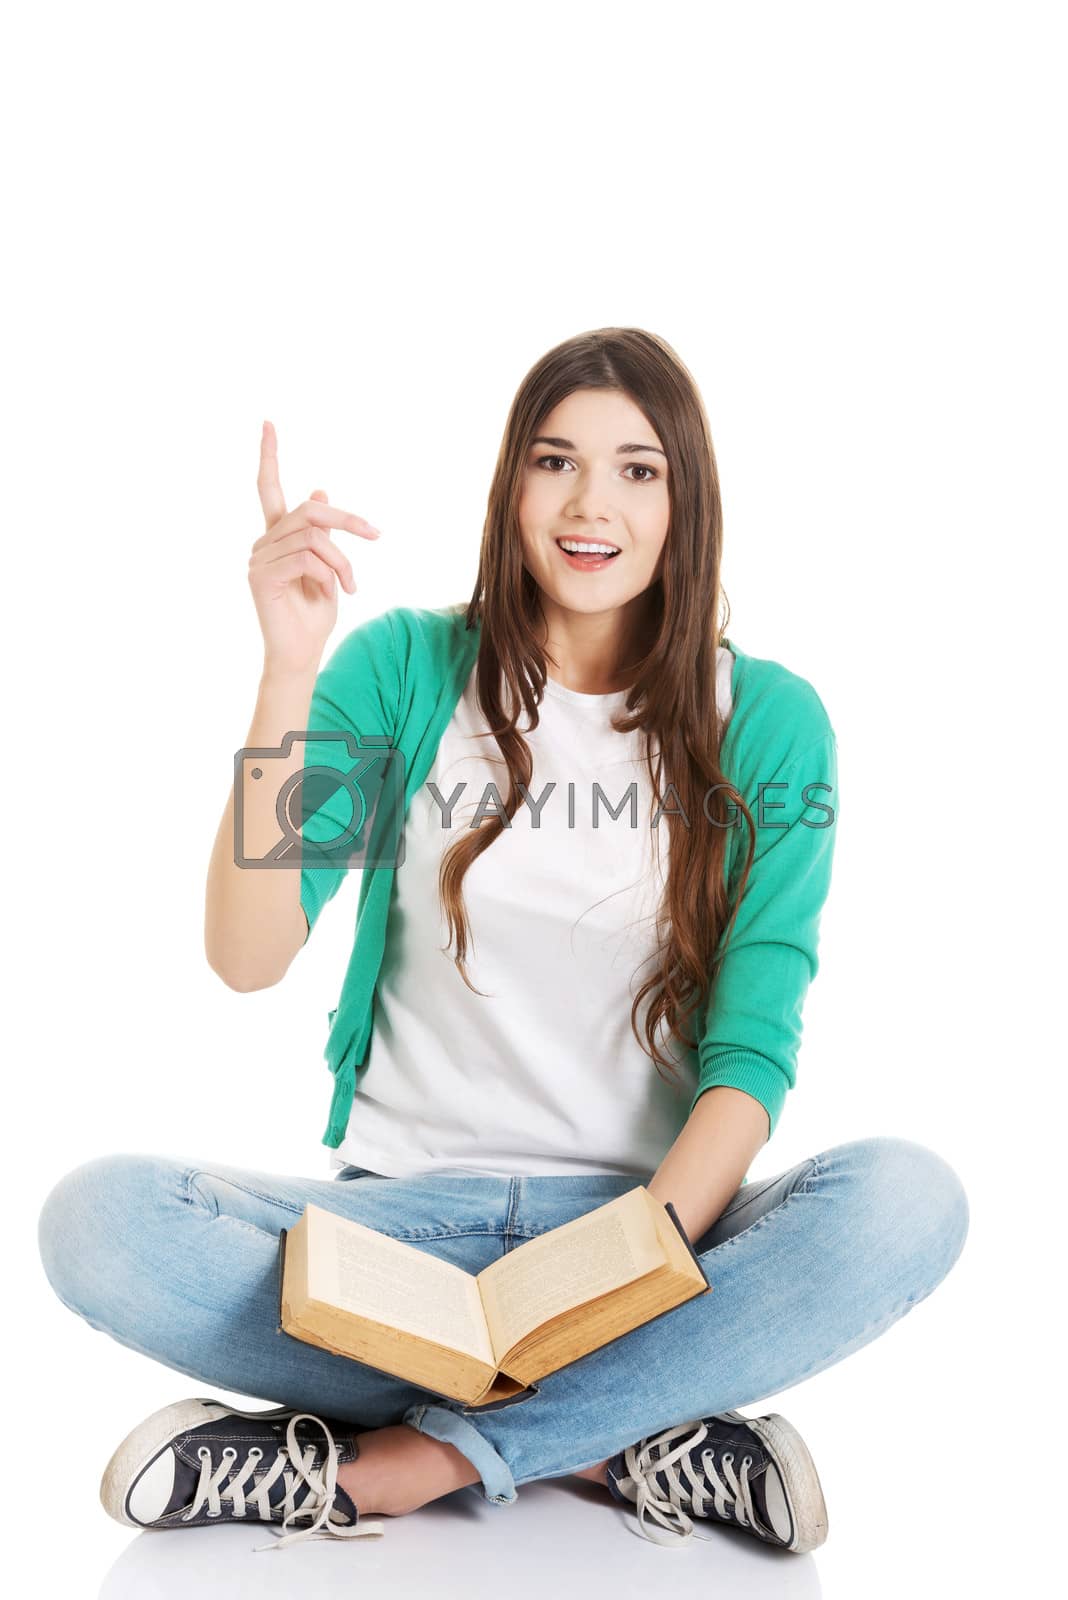 Royalty free image of Young beautiful woman student sitting with book and pointing up. by BDS